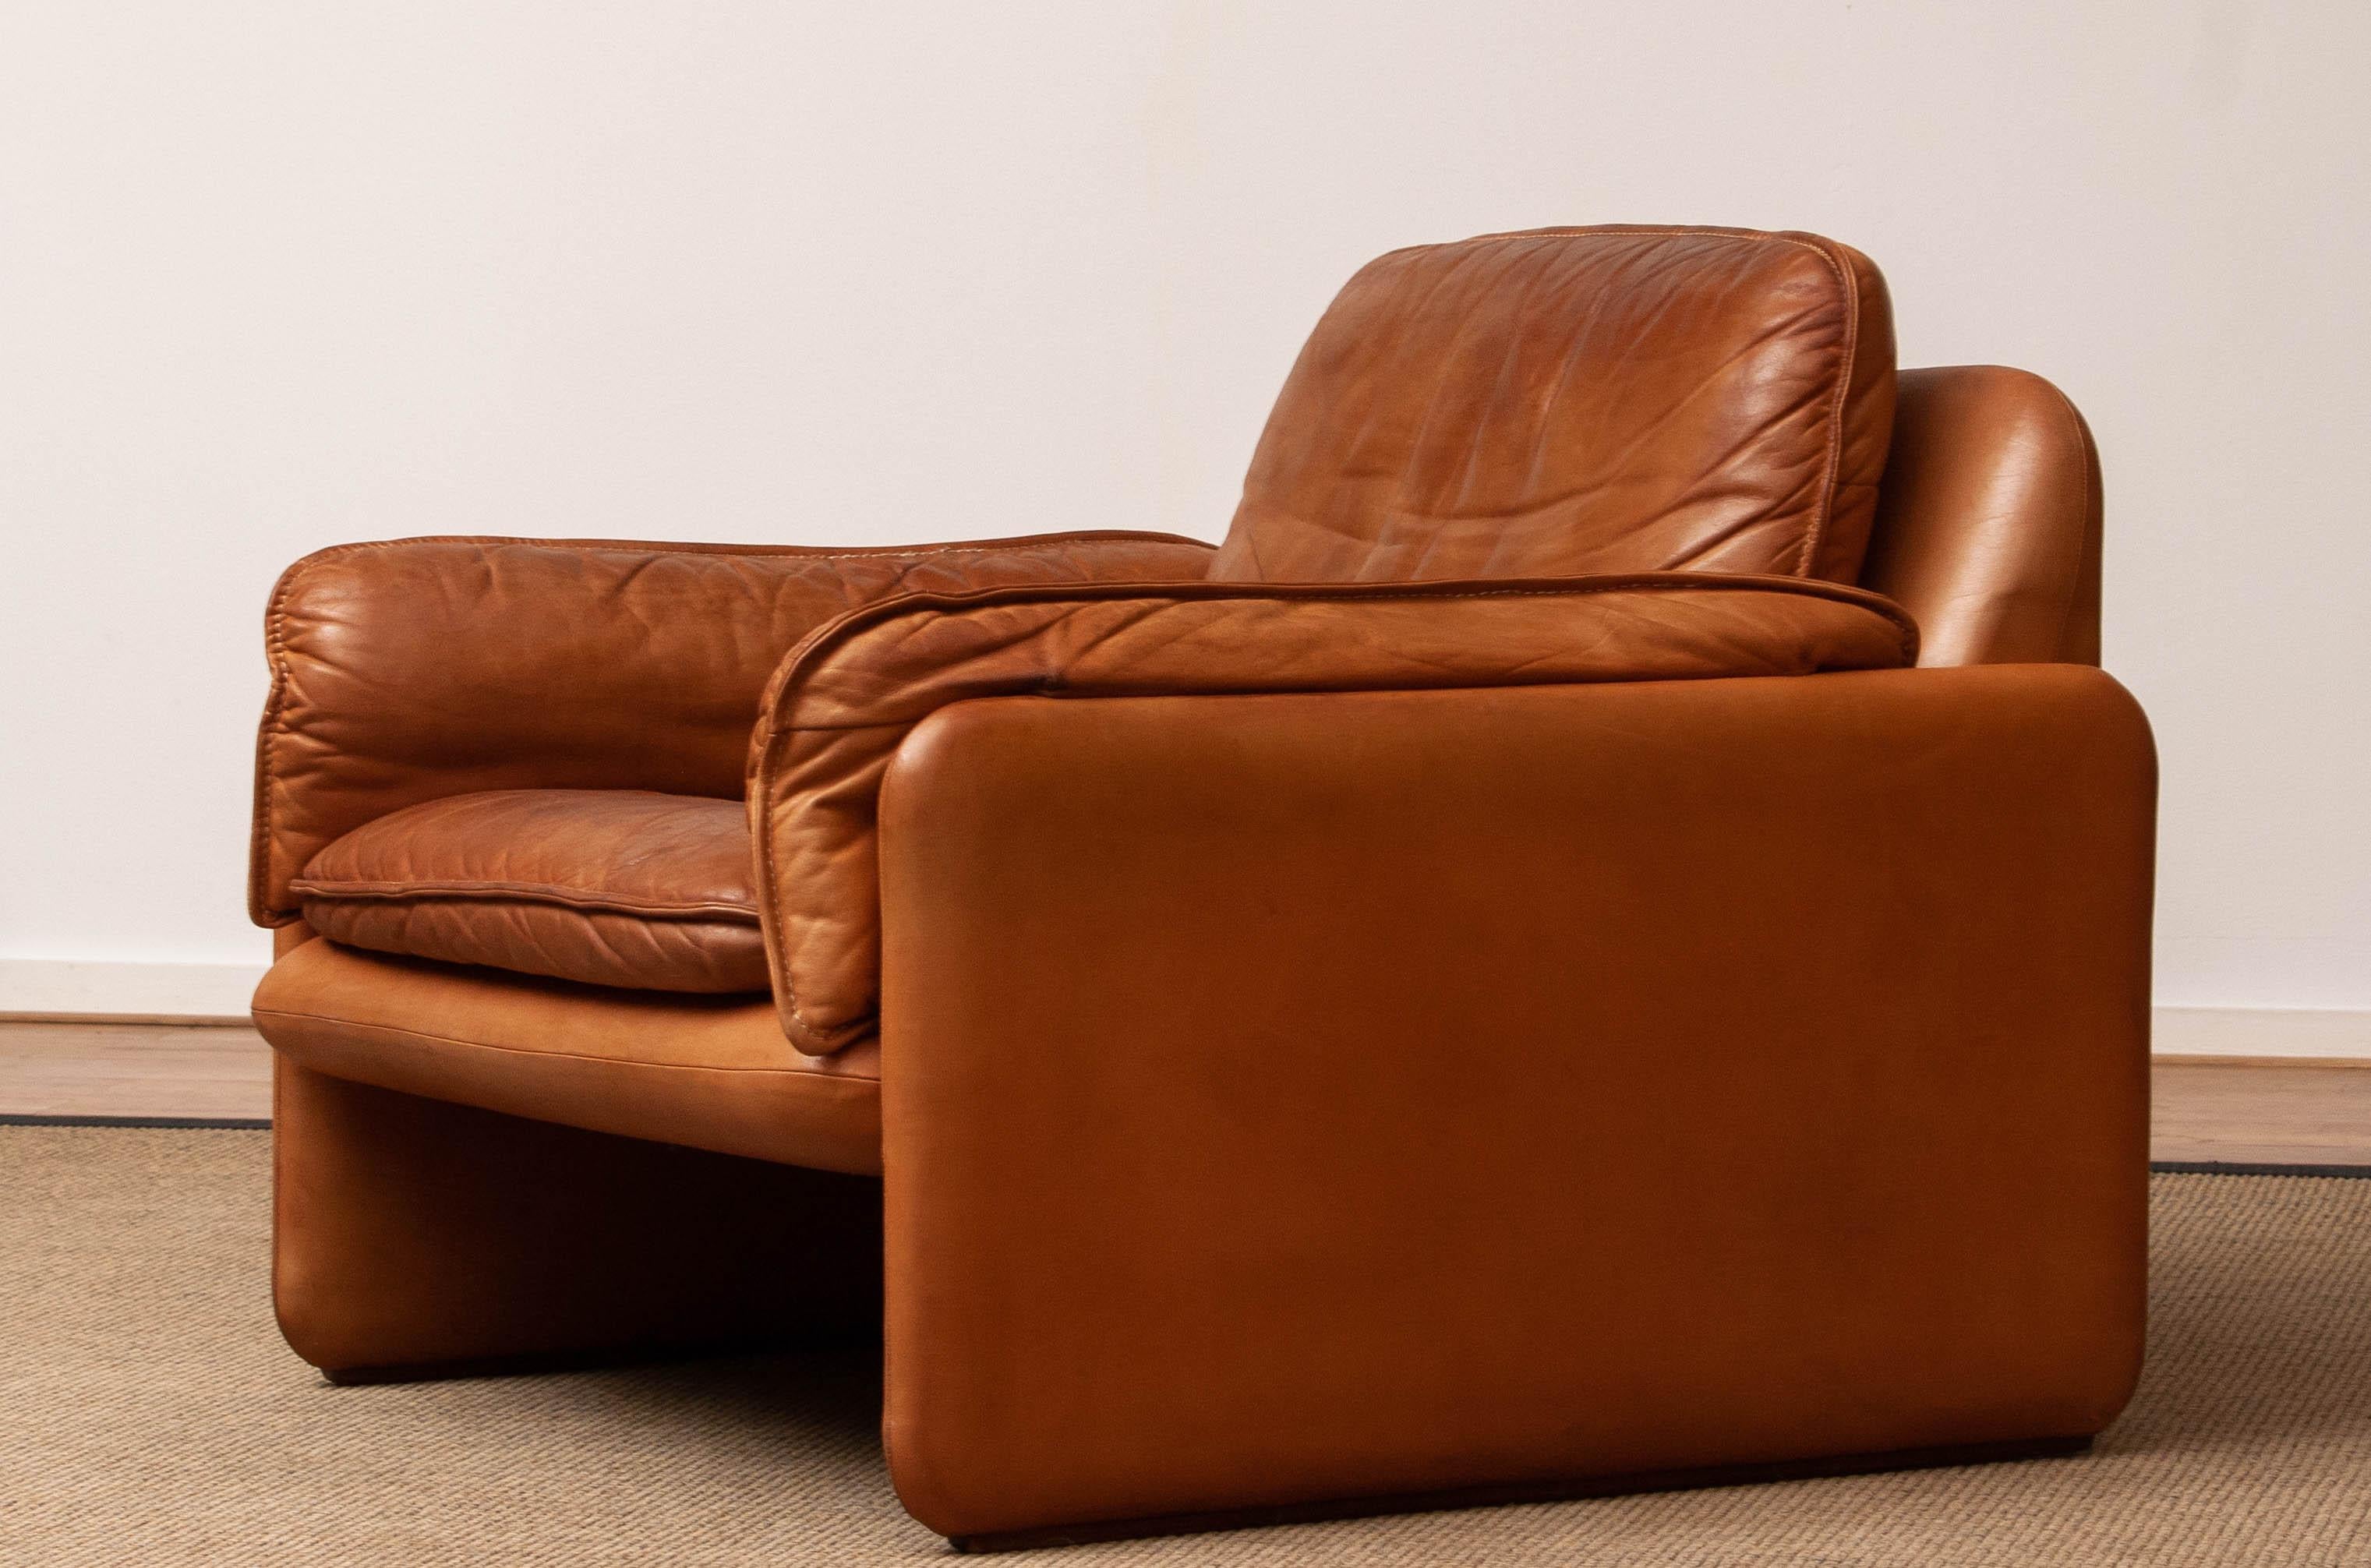 1960's DS-61 Cognac / Nature Color Leather Brutalist Lounge Chair by 'De Sede' In Good Condition In Silvolde, Gelderland